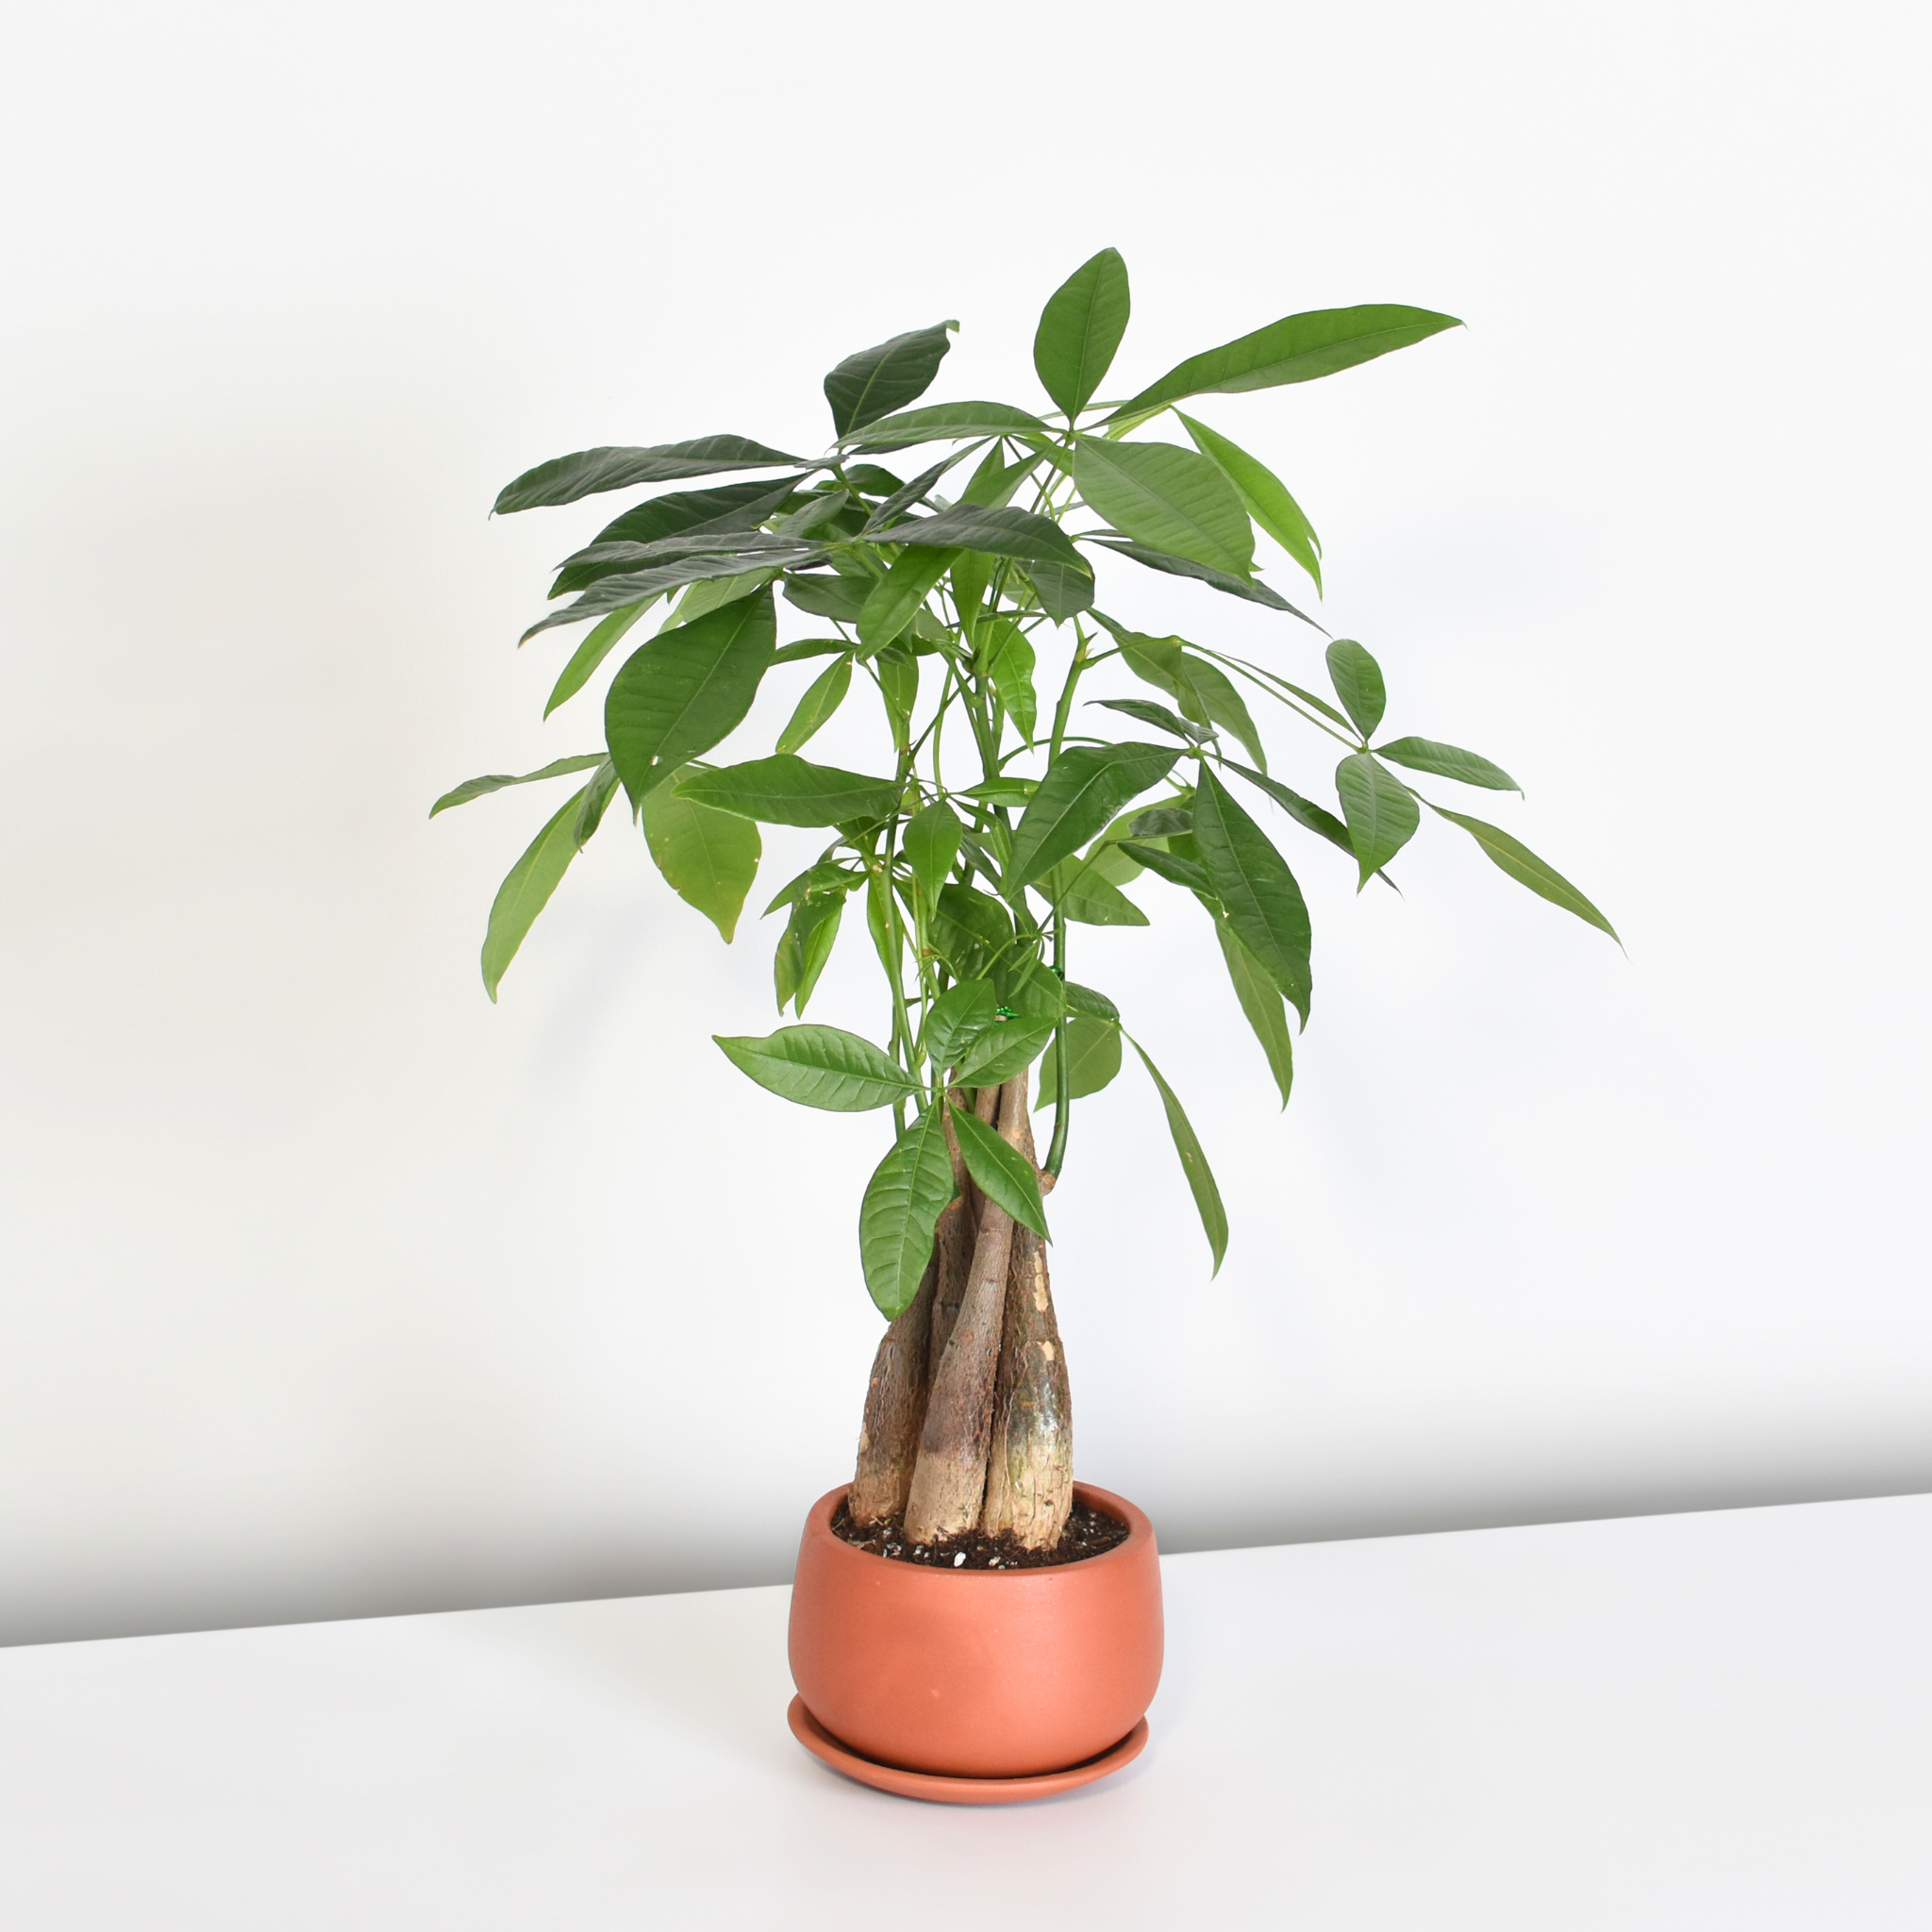 $100 Potted Braided Money Tree Pet Friendly Plant - The Flower Bar